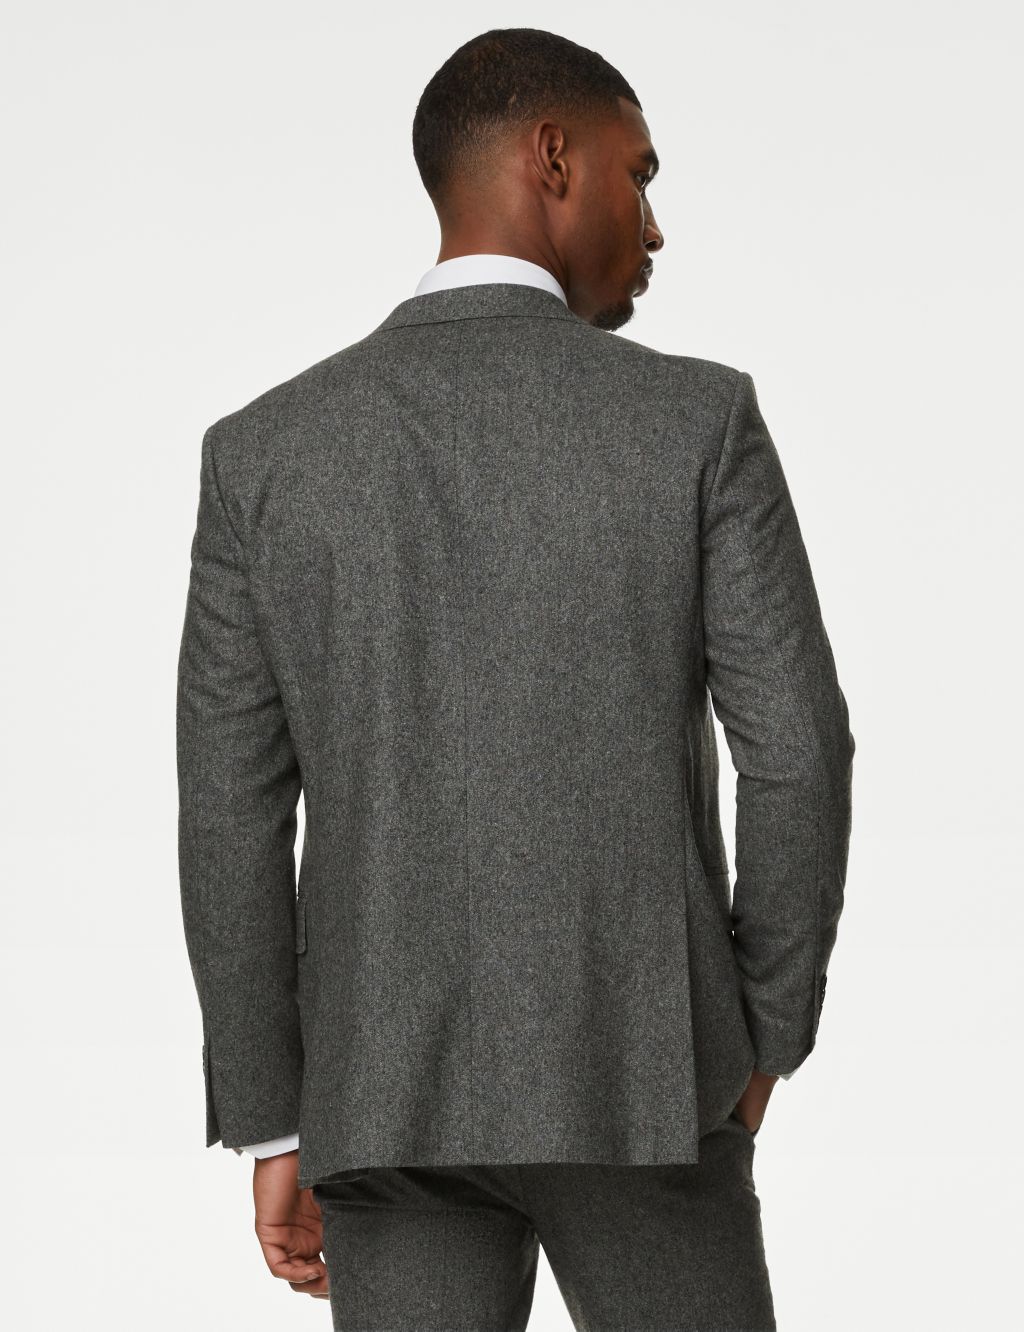 Tailored Fit Italian Wool Rich Suit Jacket image 5